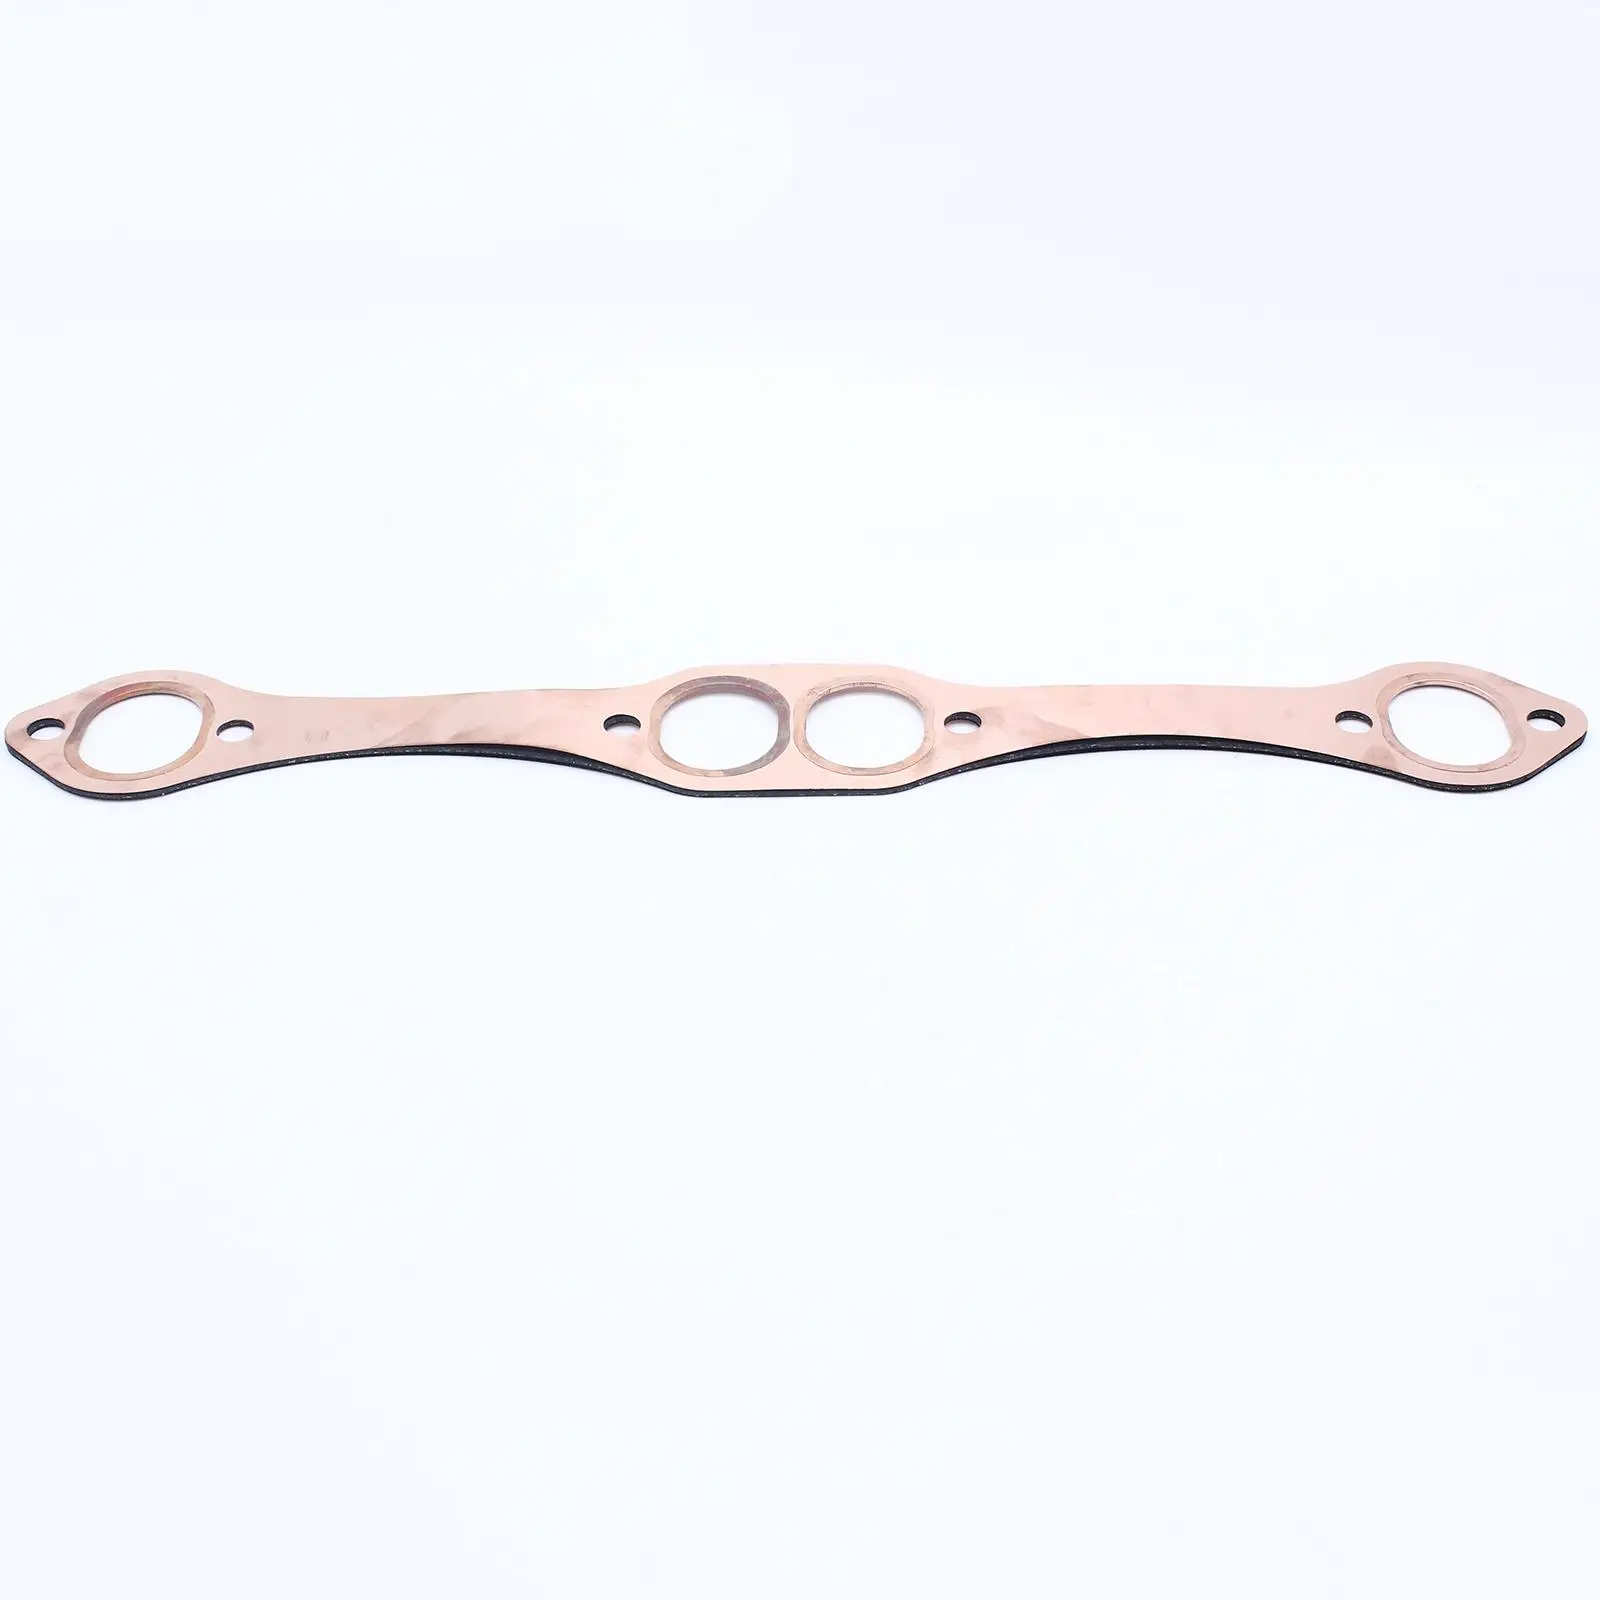 1 Pair SBC Oval Port Copper Header Exhaust Gasket Seal For Chevy SB 327 305 350 383 Exhaust Manifold Gasket Set